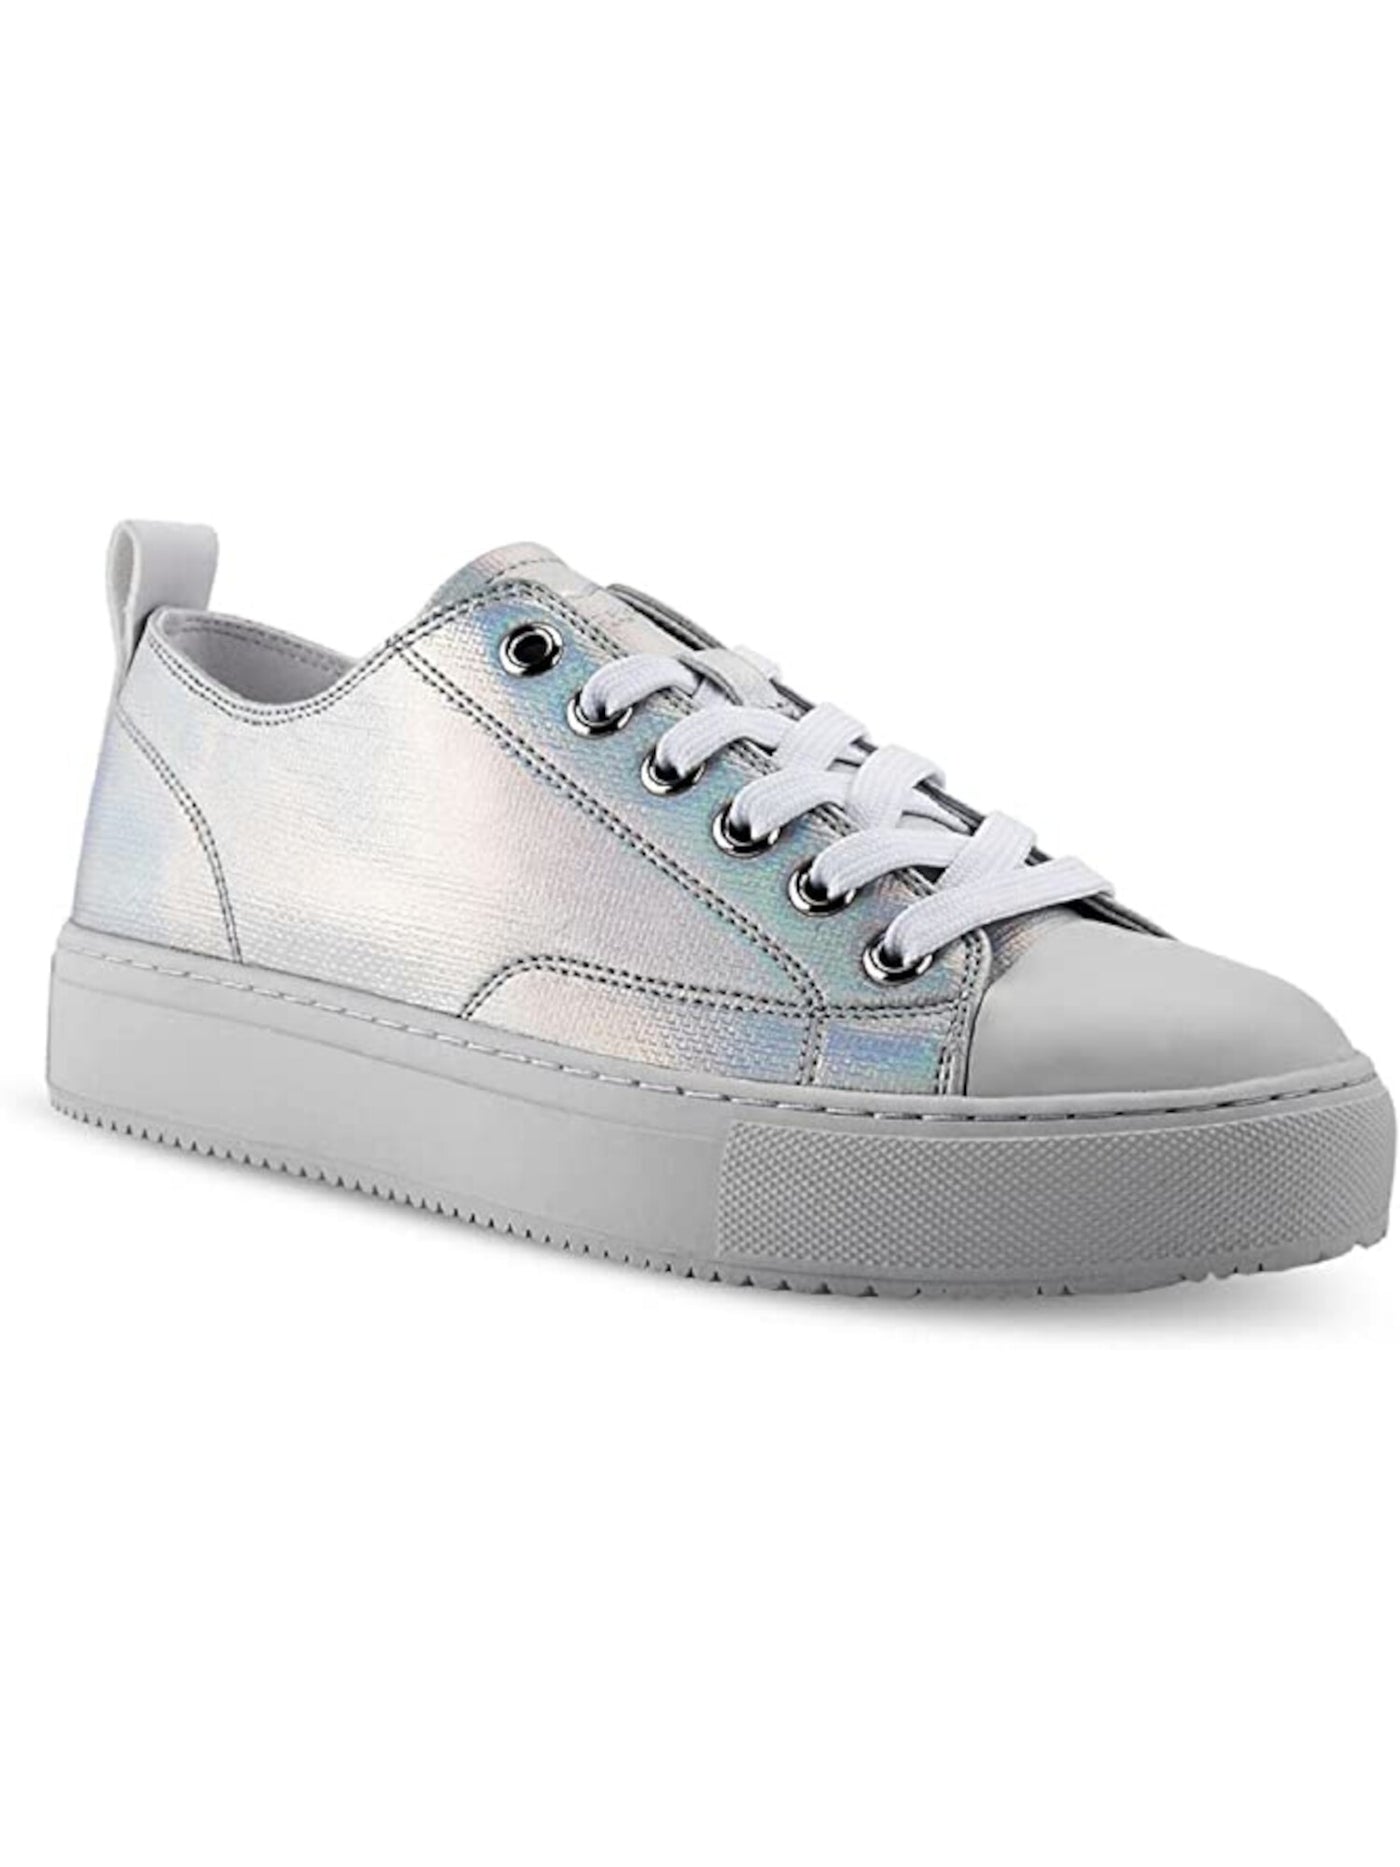 MARC FISHER Womens Silver Multi Metallic Cady Cap Toe Platform Lace-Up Athletic Sneakers Shoes 5.5 M